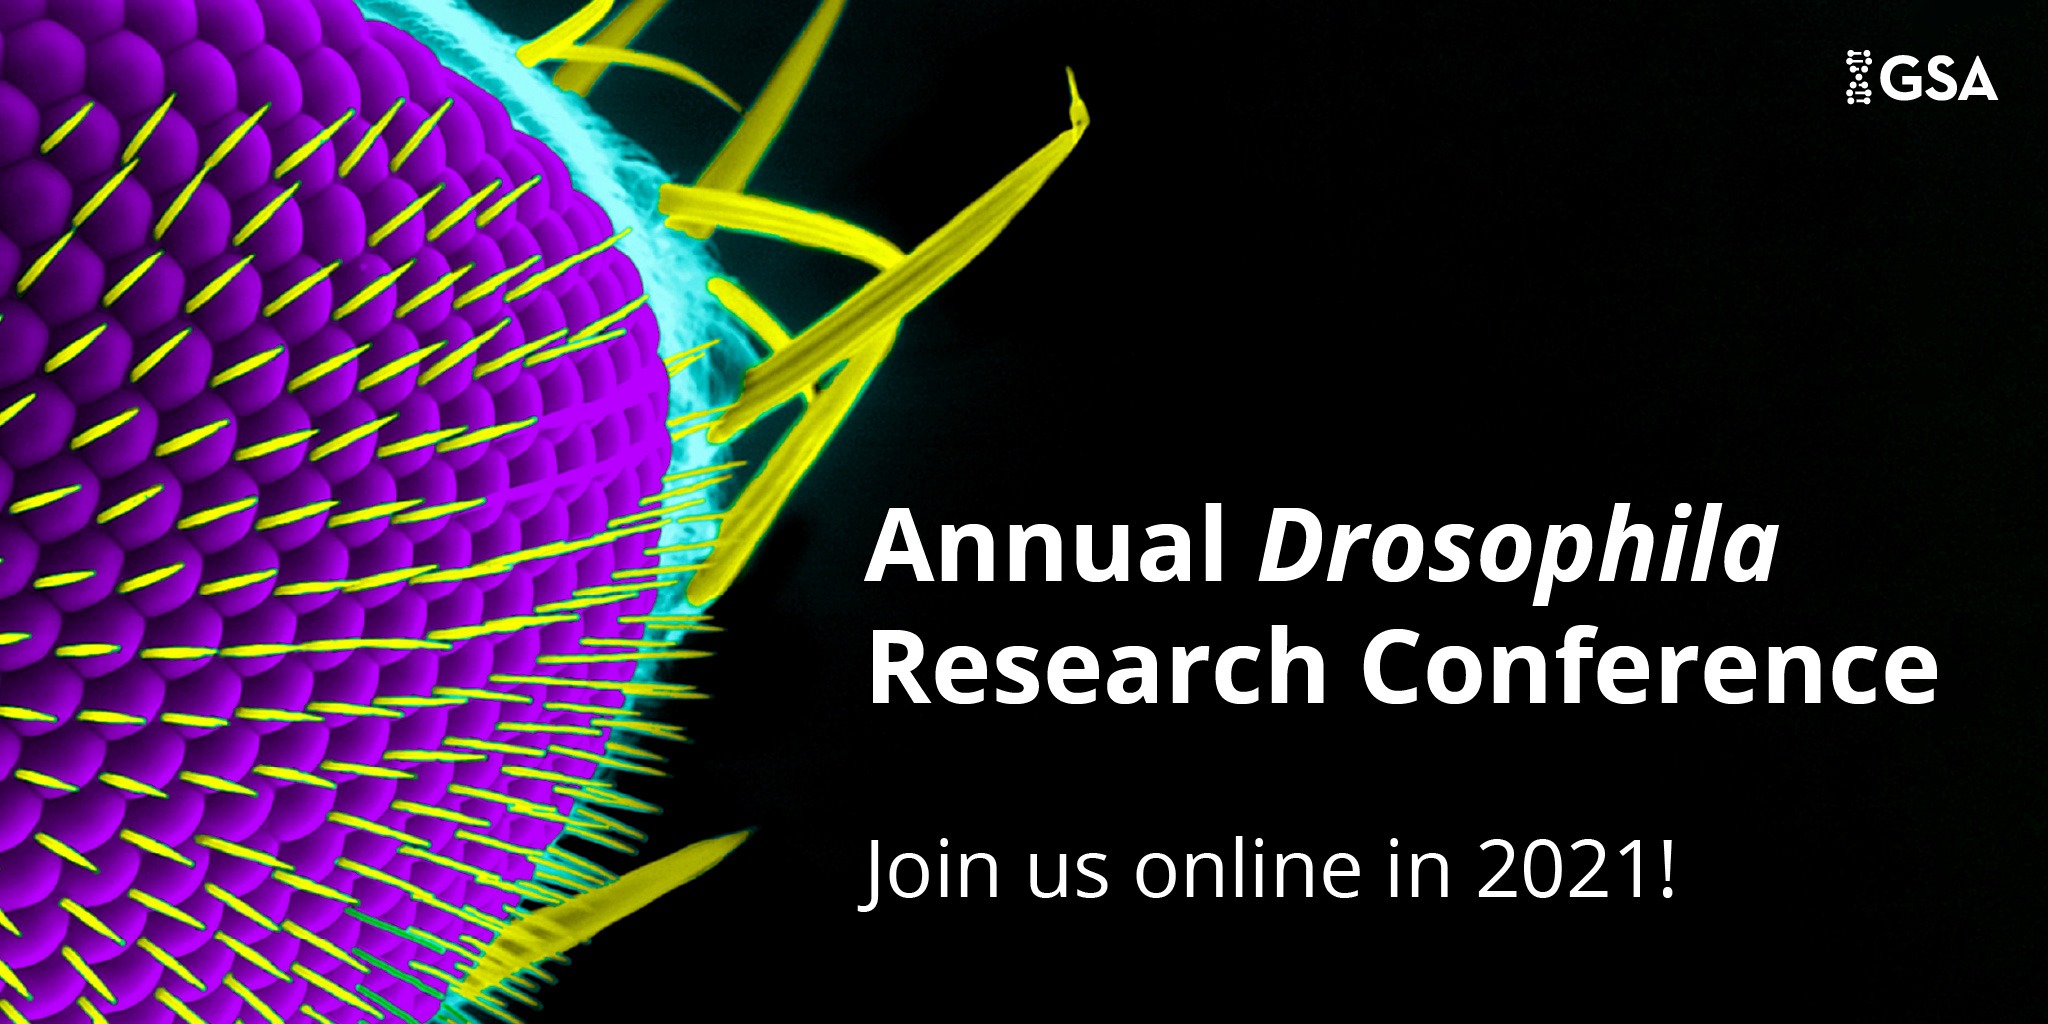 Schedule 64th Annual Drosophila Research Conference